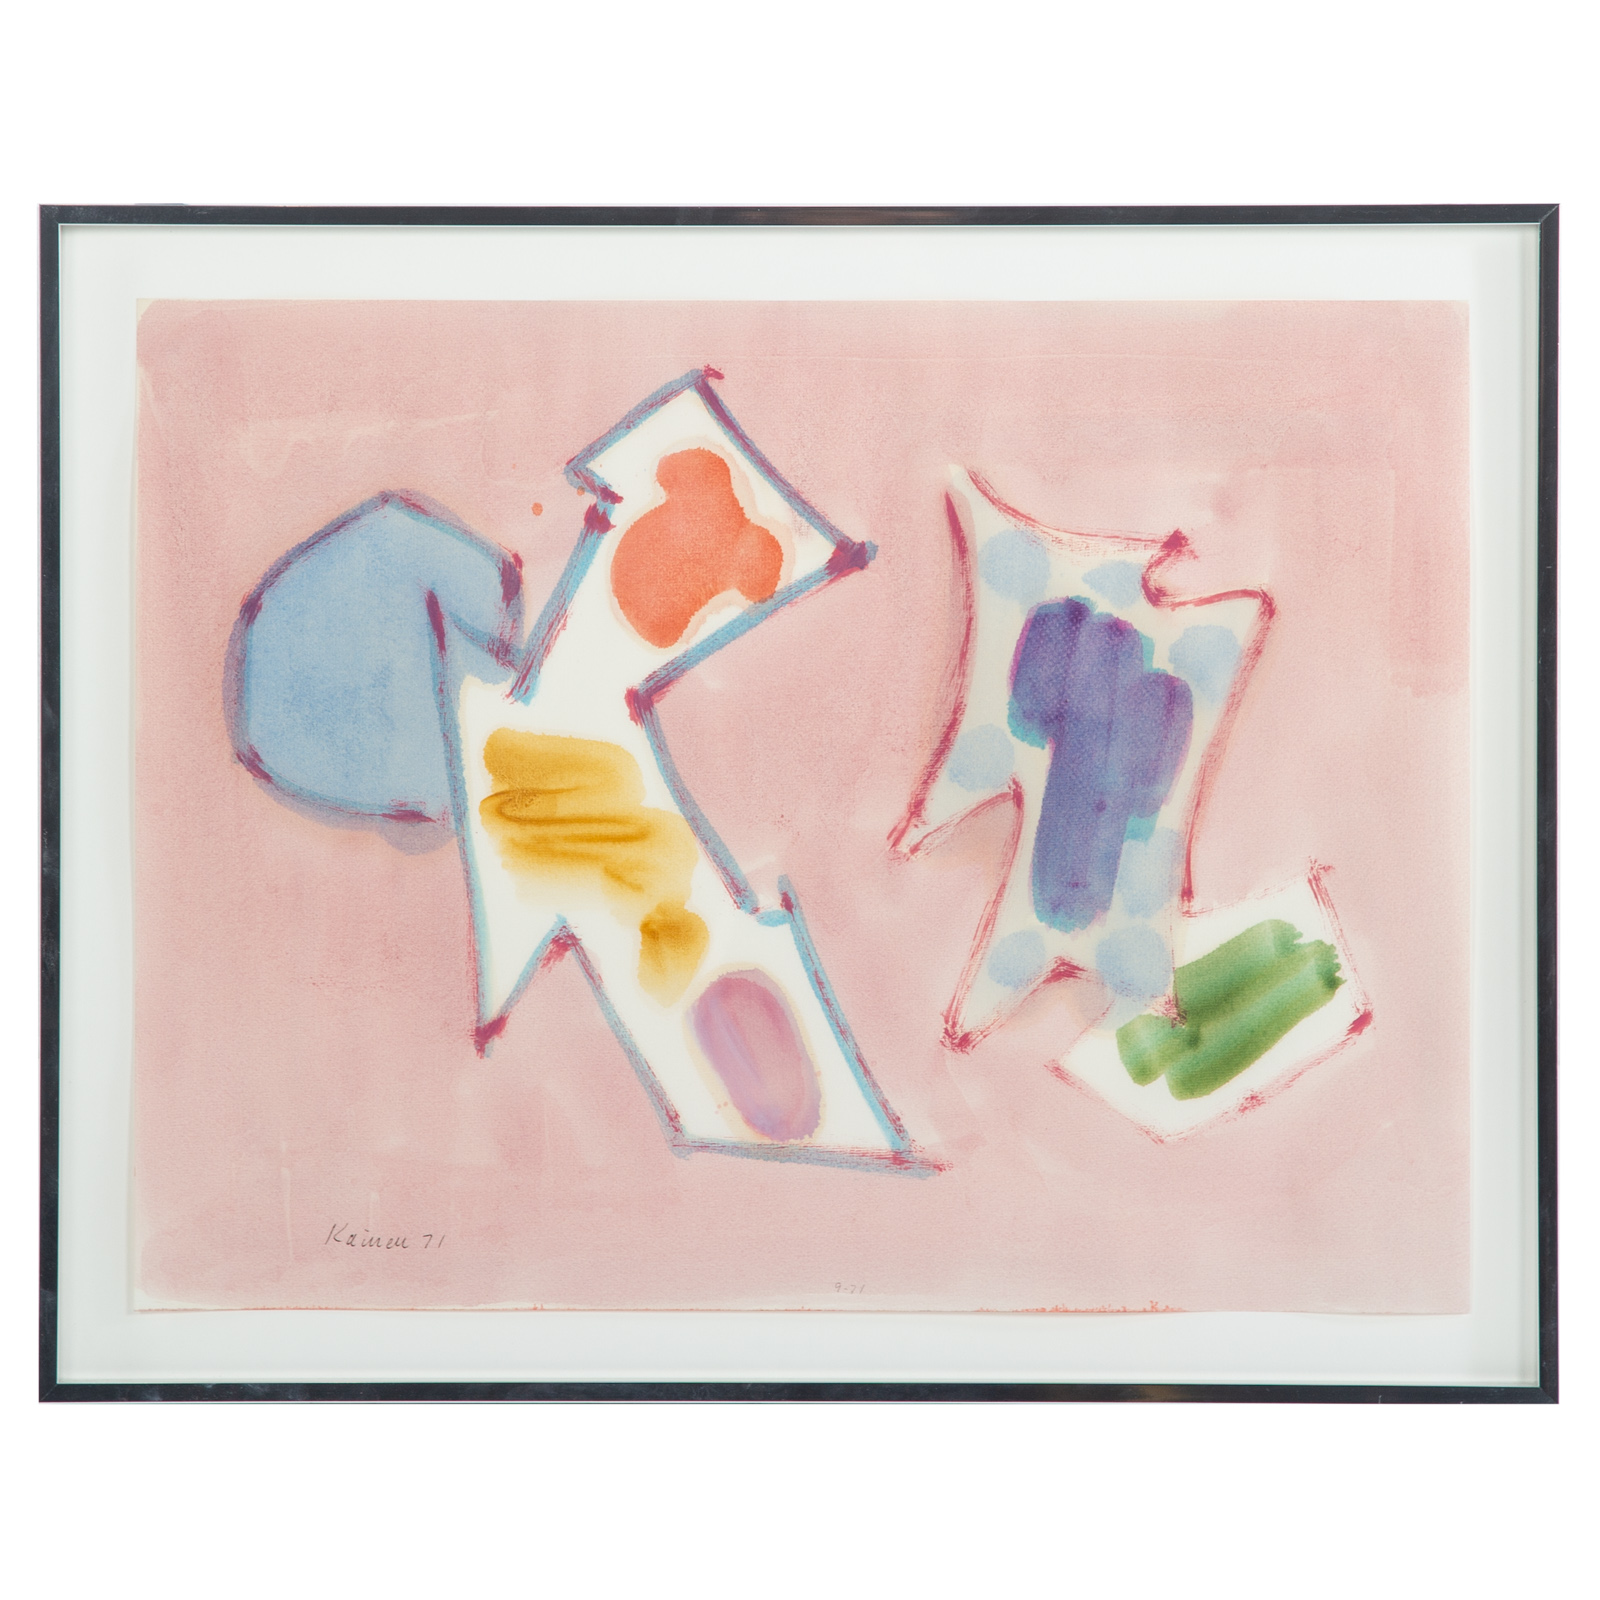 JACOB KAINEN. PINK ABSTRACT, WATERCOLOR